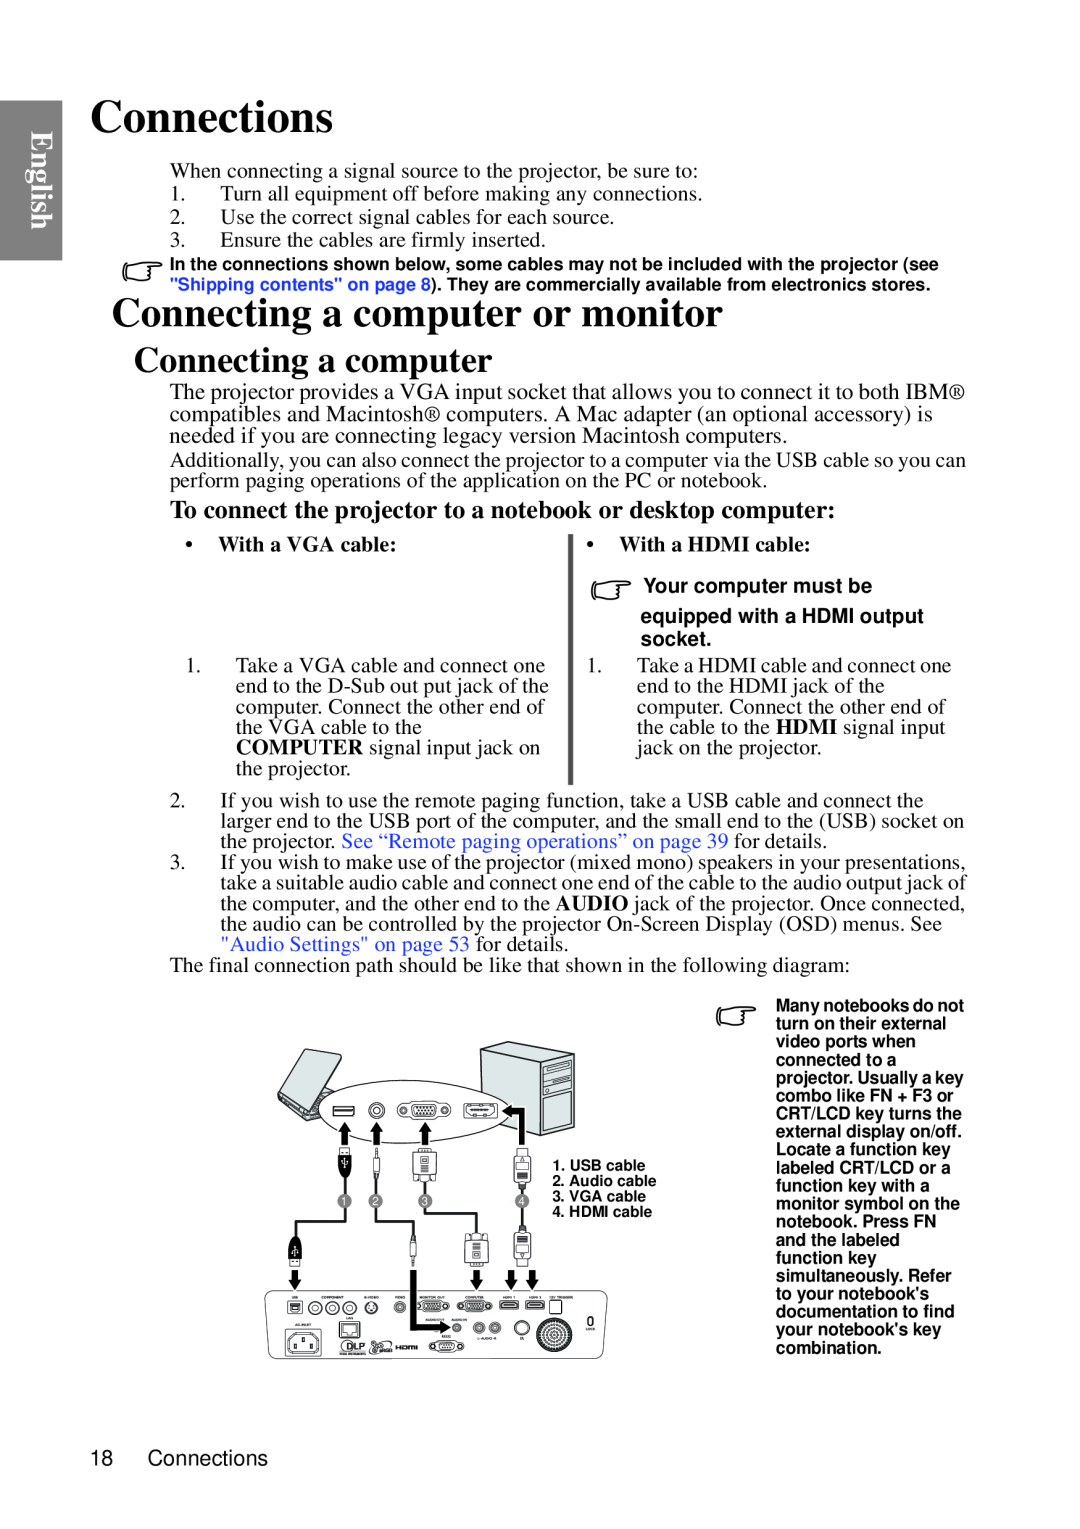 BenQ SP840 Connections, Connecting a computer or monitor, To connect the projector to a notebook or desktop computer 